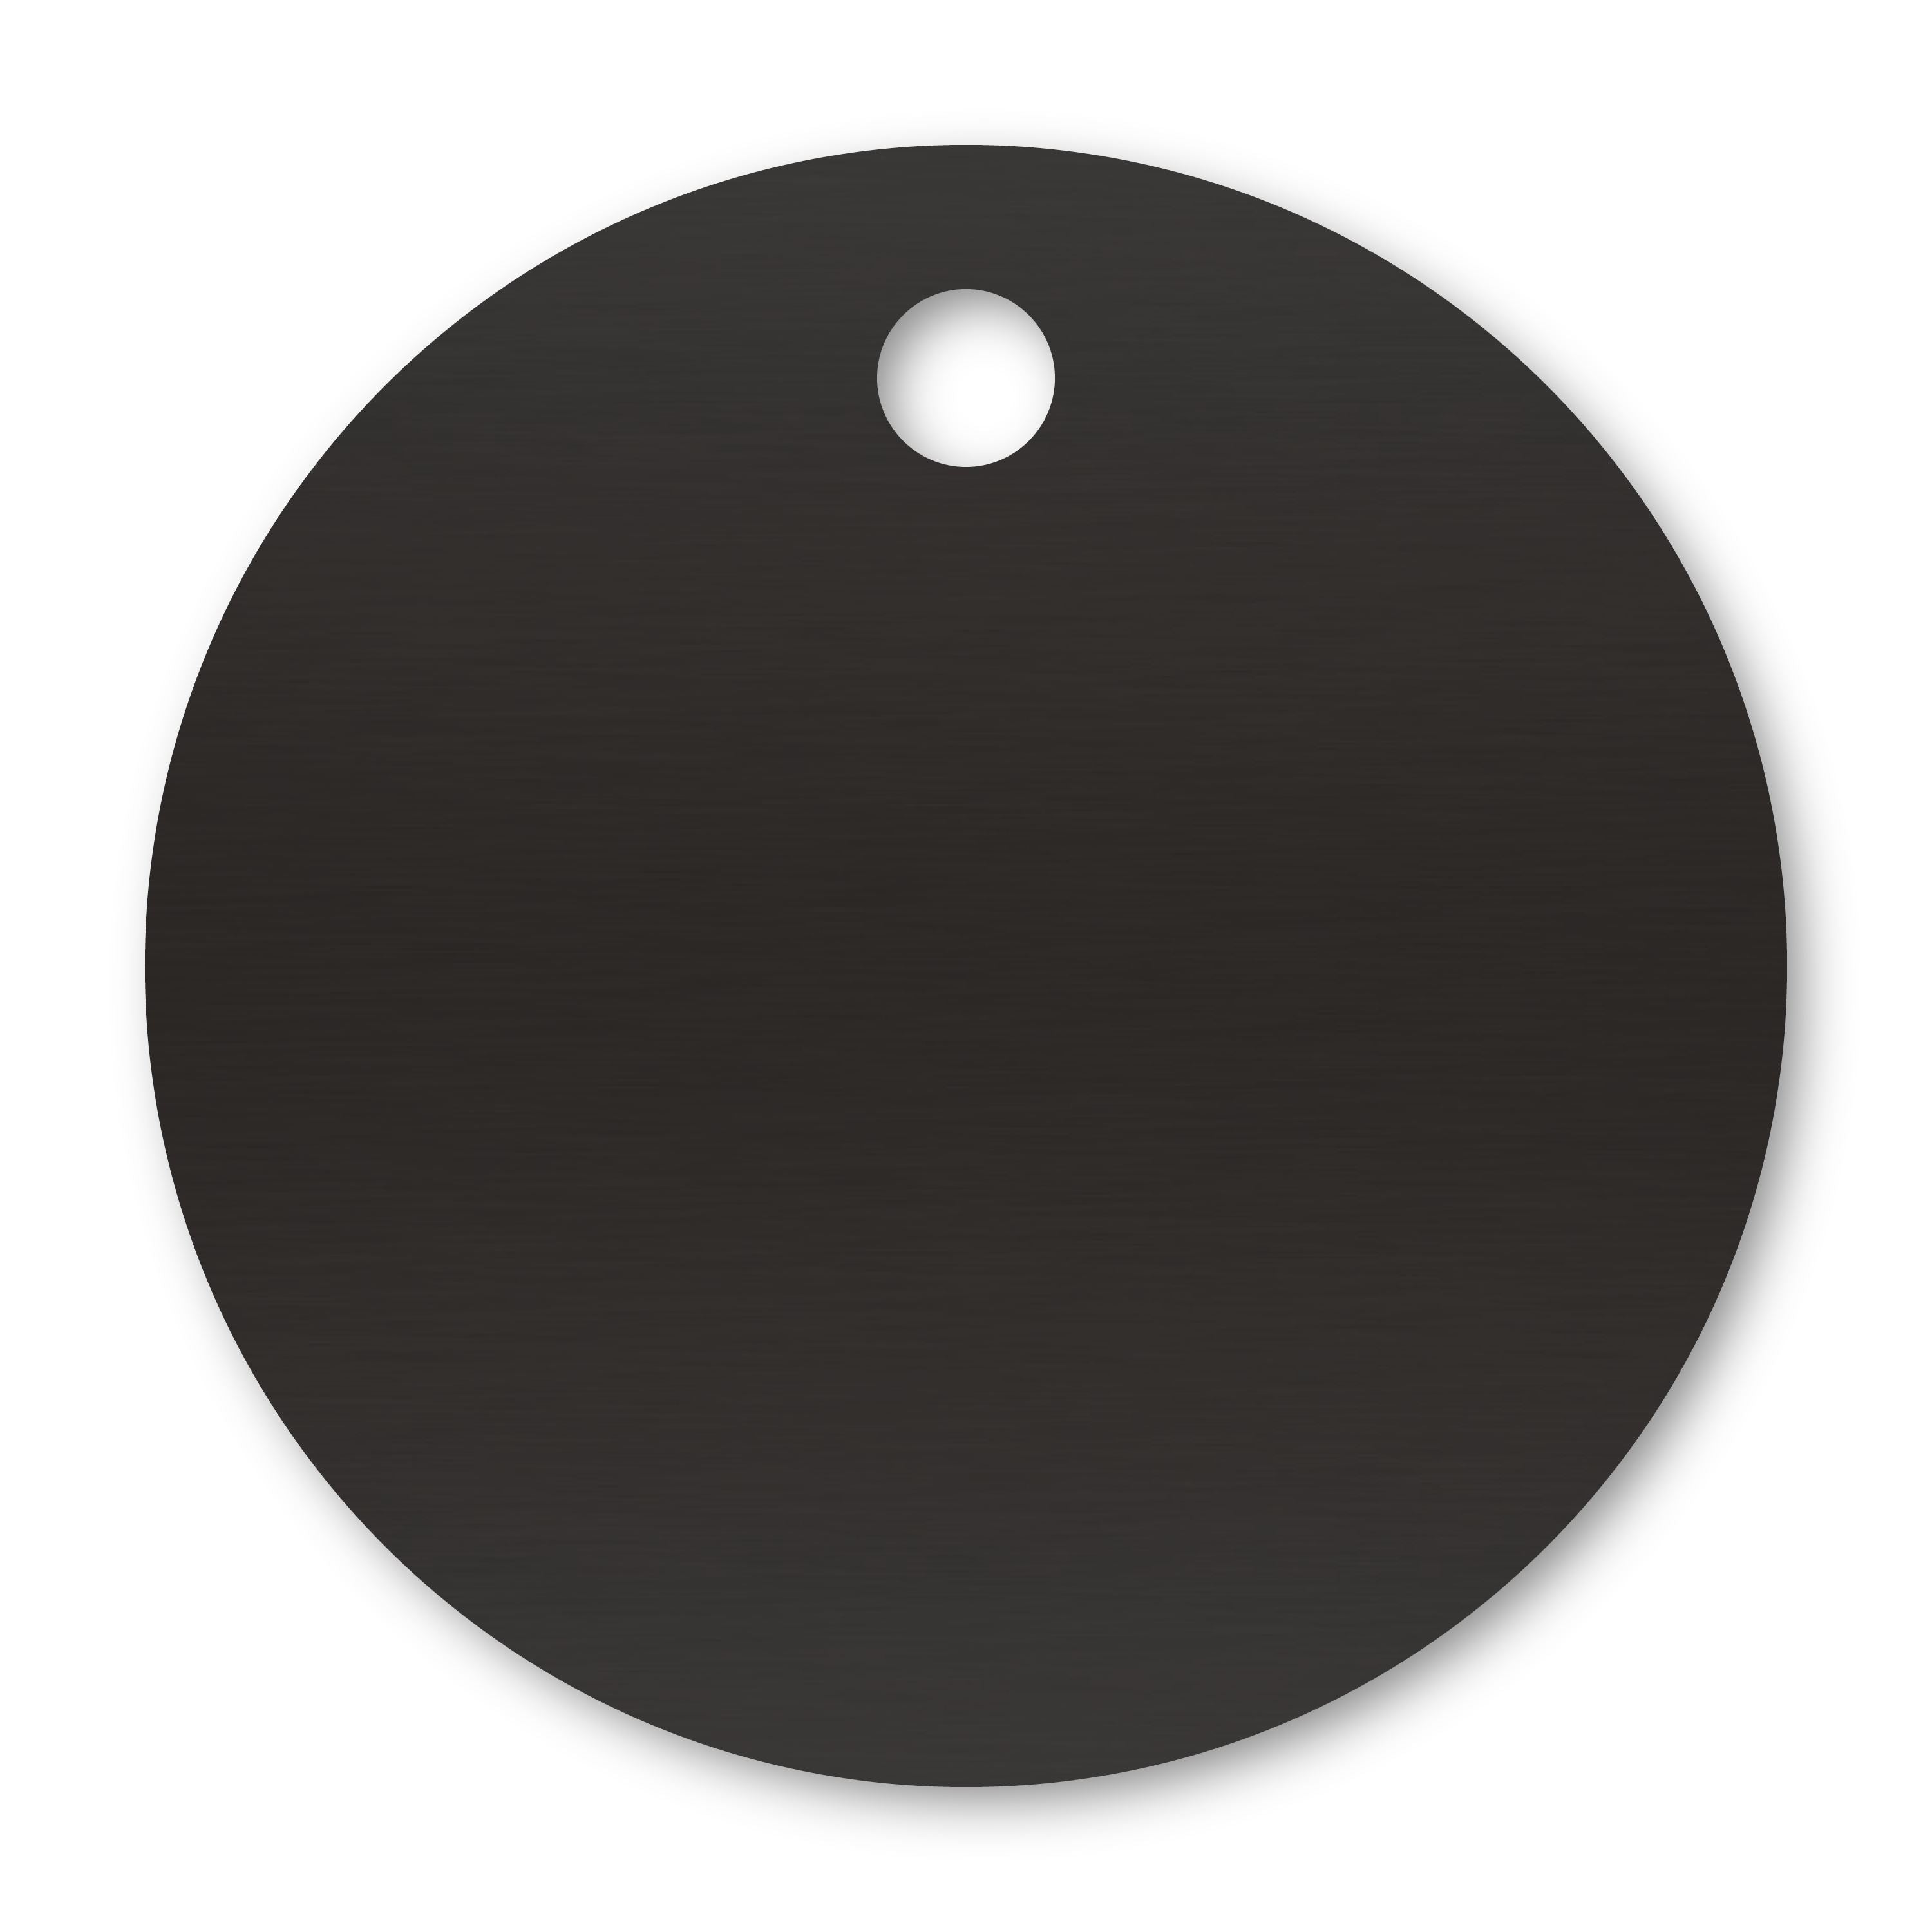 Anodized Aluminum Round Tags, 1-1/4" with 1/8" Hole, Laser Engraved Metal Tags Craftworks NW Black 